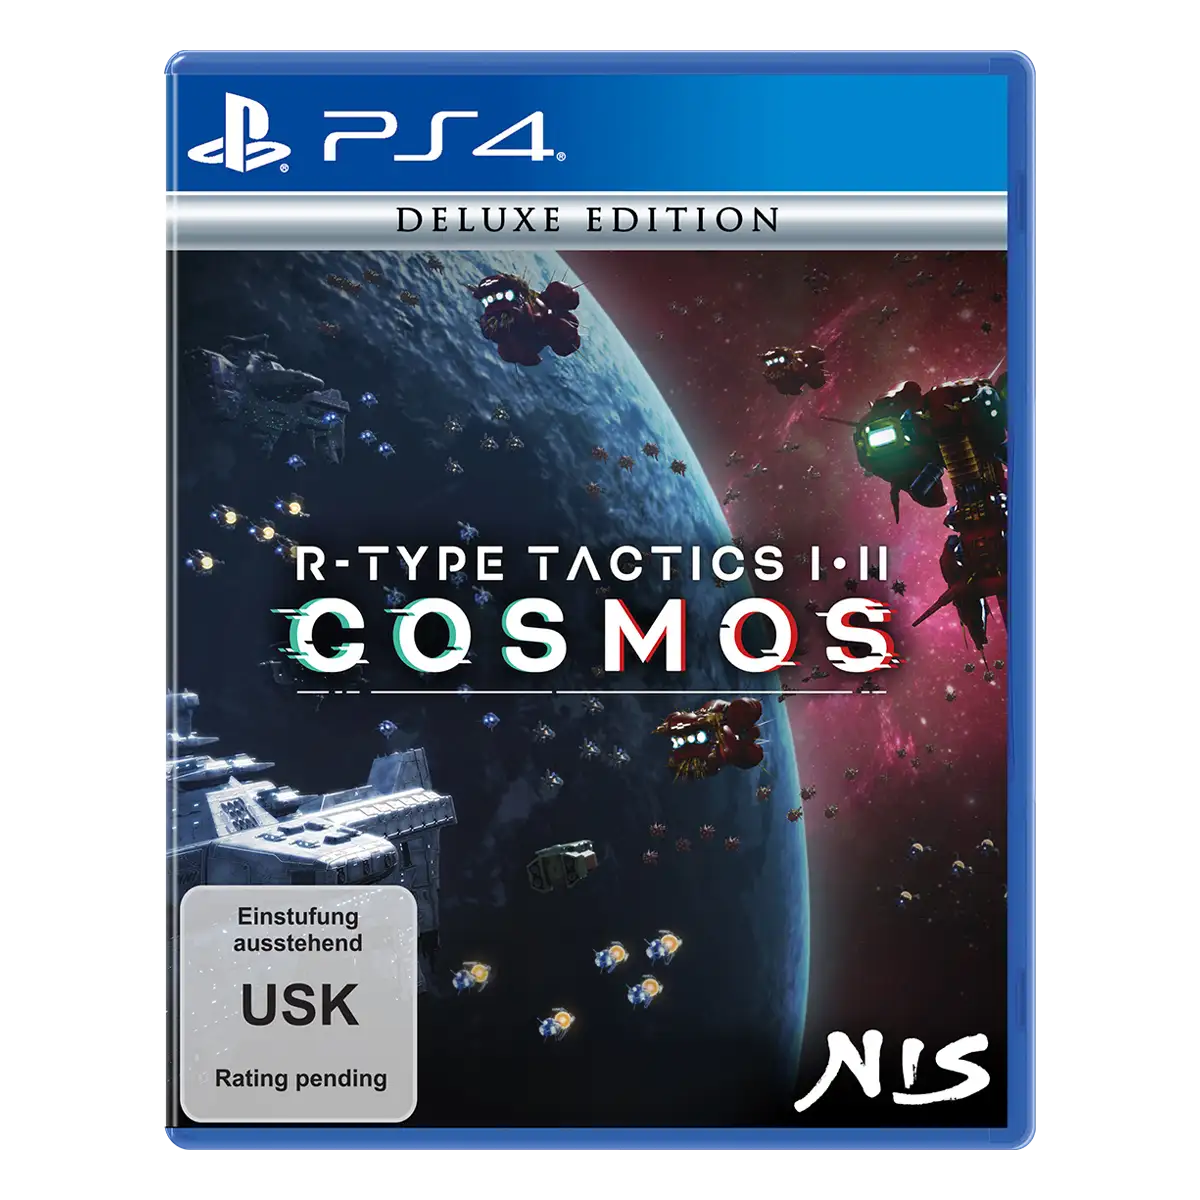 R-Type Tactics 1&2 Cosmos Deluxe Edition (PS4)